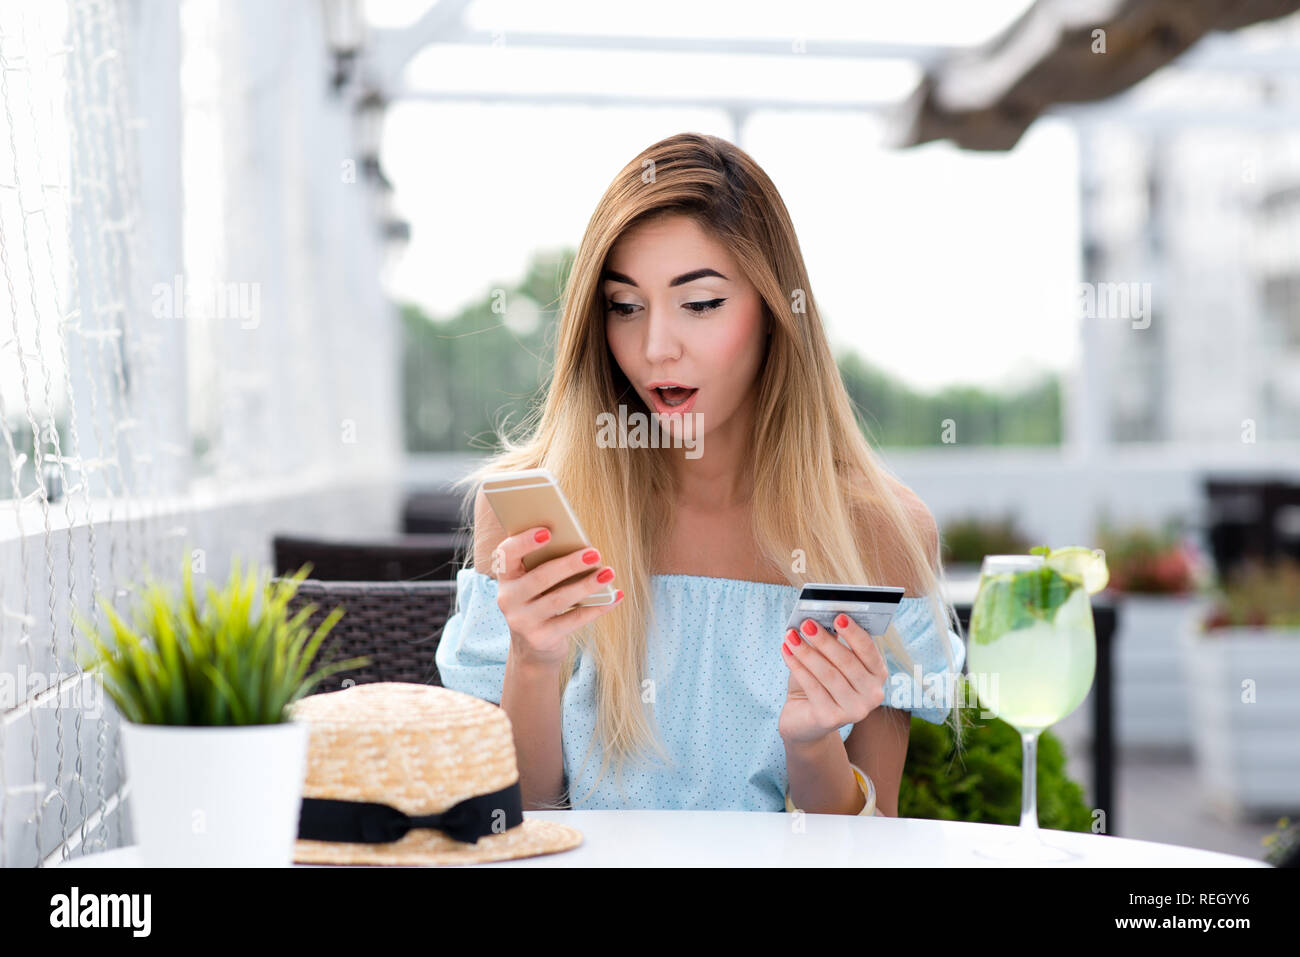 Girl cafe in summer. Pay breakfast and lunch with plastic card by phone via Internet application. Emotion of surprise, shocked valuable product. Concept of misunderstanding confusion big write-off. Stock Photo